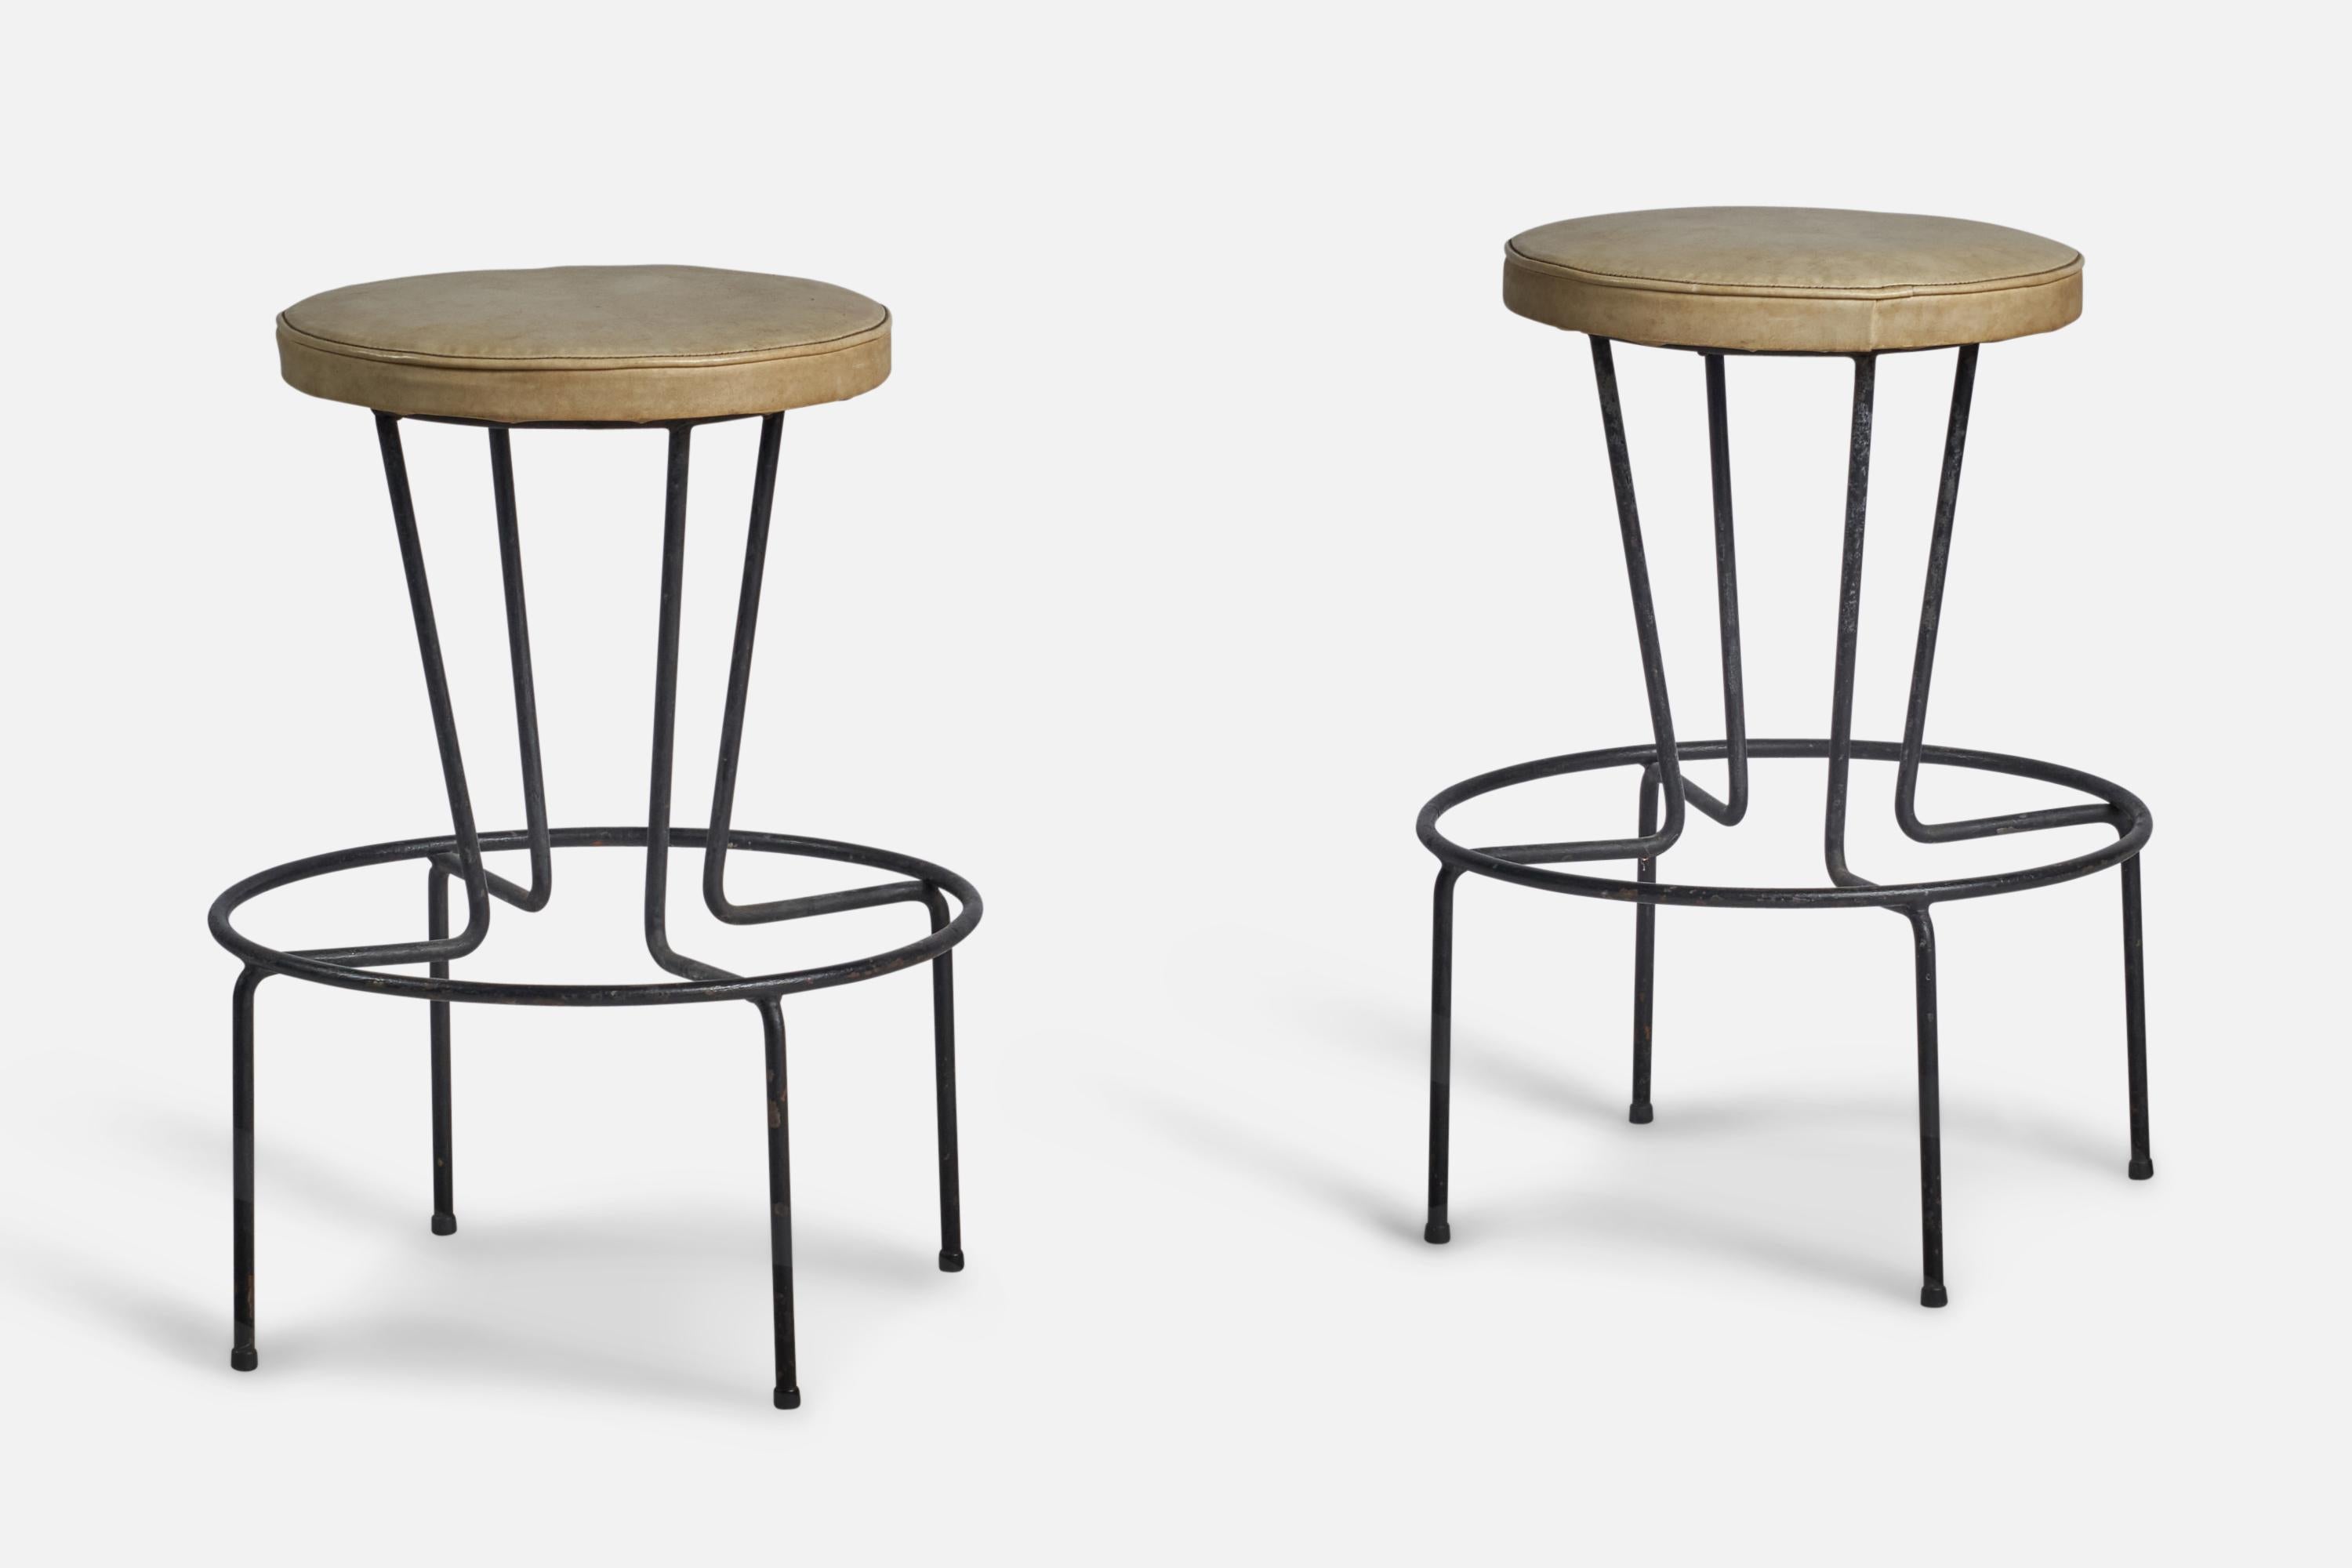 A pair of black-lacquered metal and beige leather stools designed and produced in the US, 1950s.